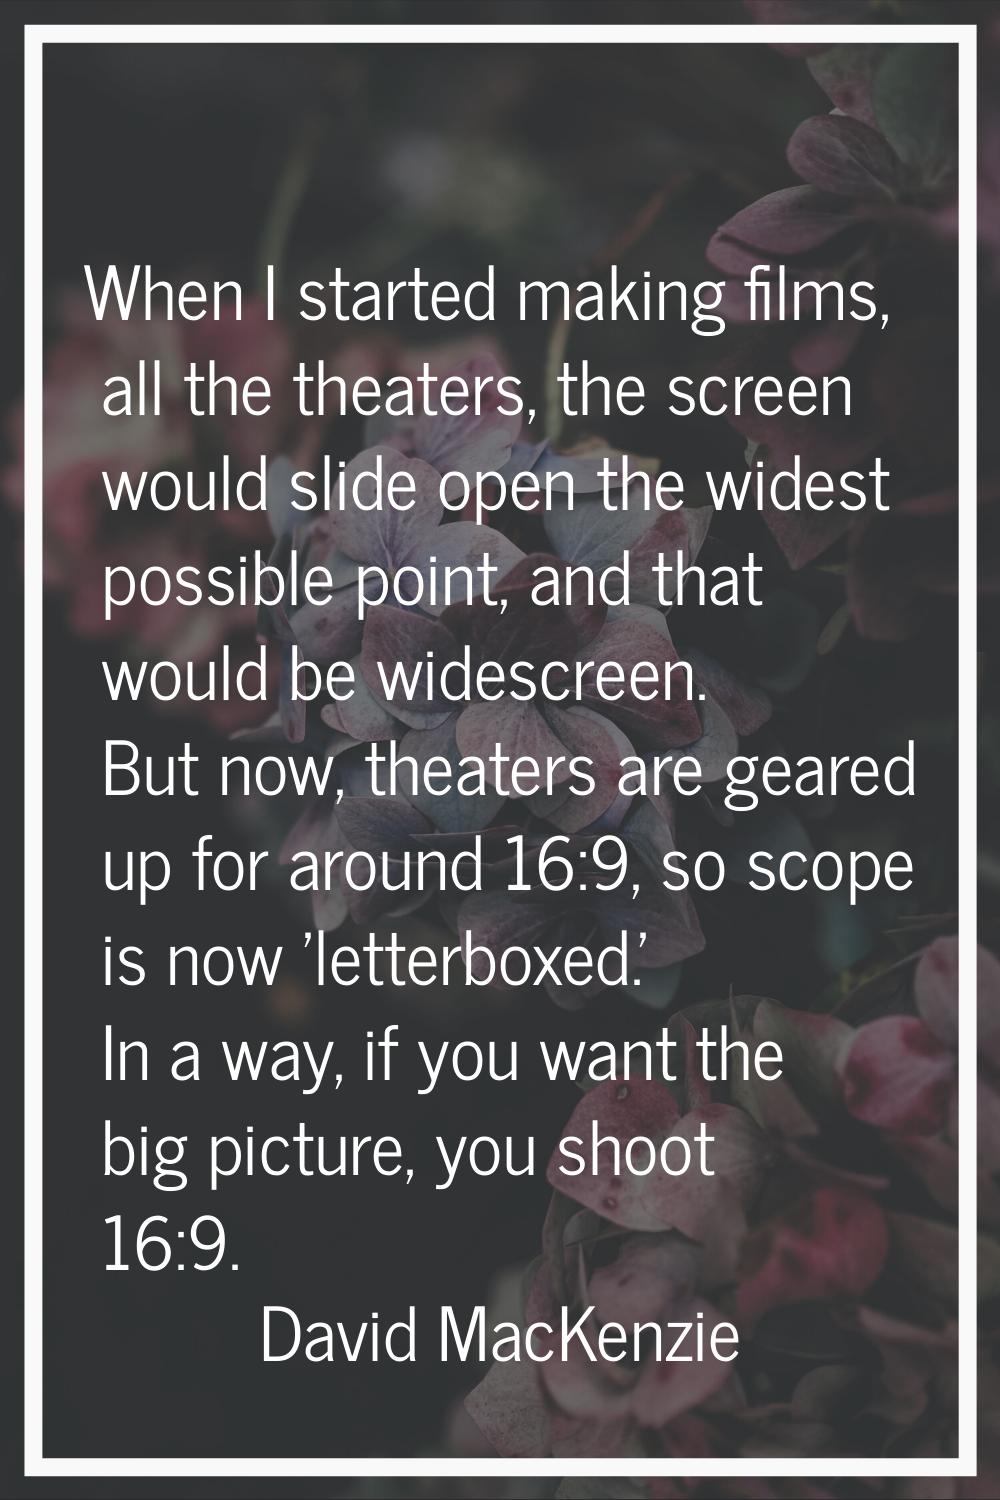 When I started making films, all the theaters, the screen would slide open the widest possible poin